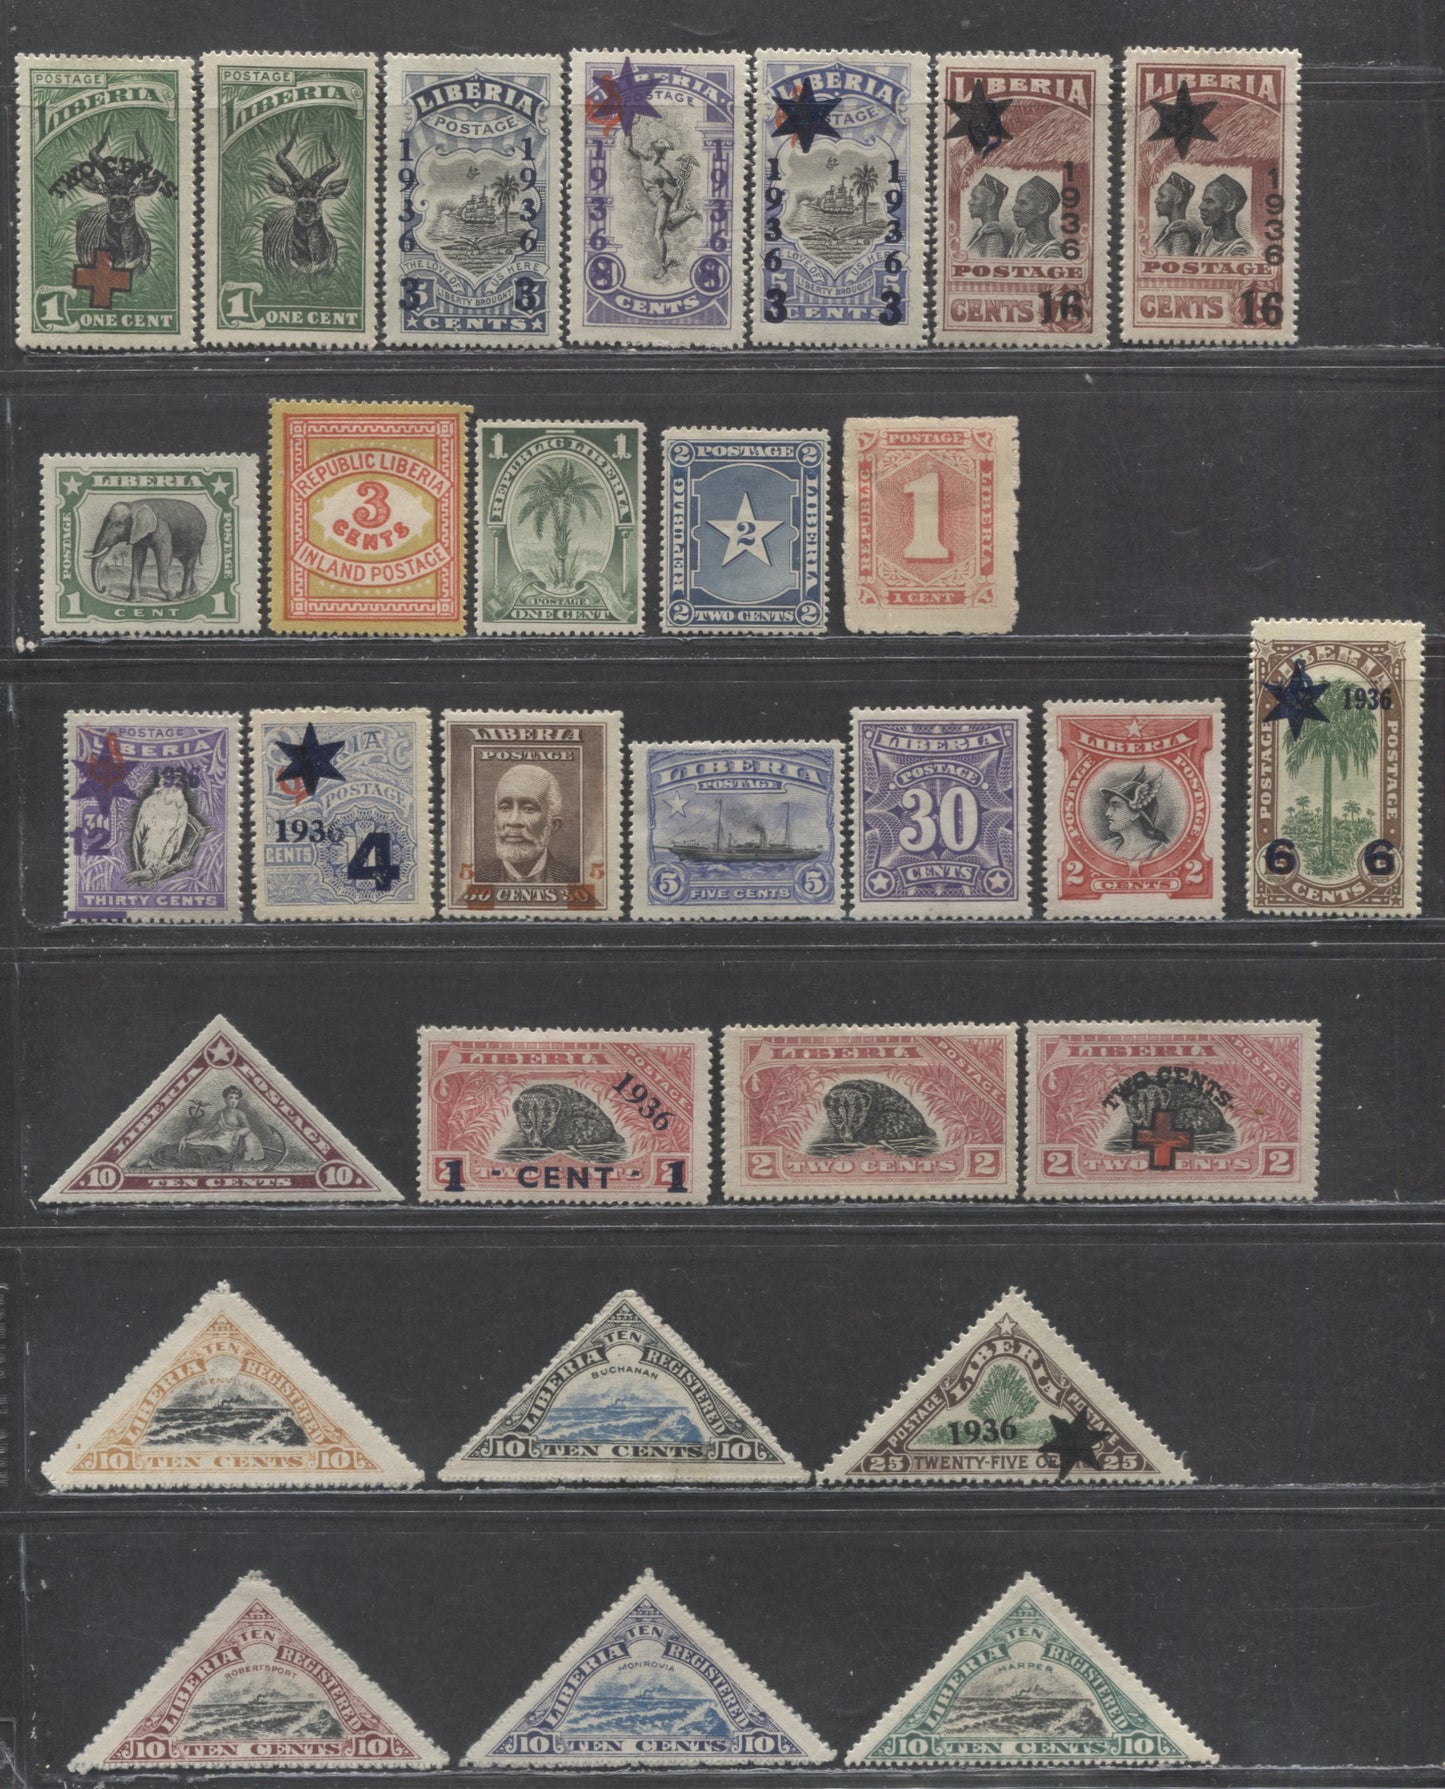 Lot 445 Liberia SC#24/F19 1885-1936 Definitives, Semi Postals & Registrations, 29 Fine/Very Fine Used Singles, Click on Listing to See ALL Pictures, 2022 Scott Classic Cat. $33.4 USD